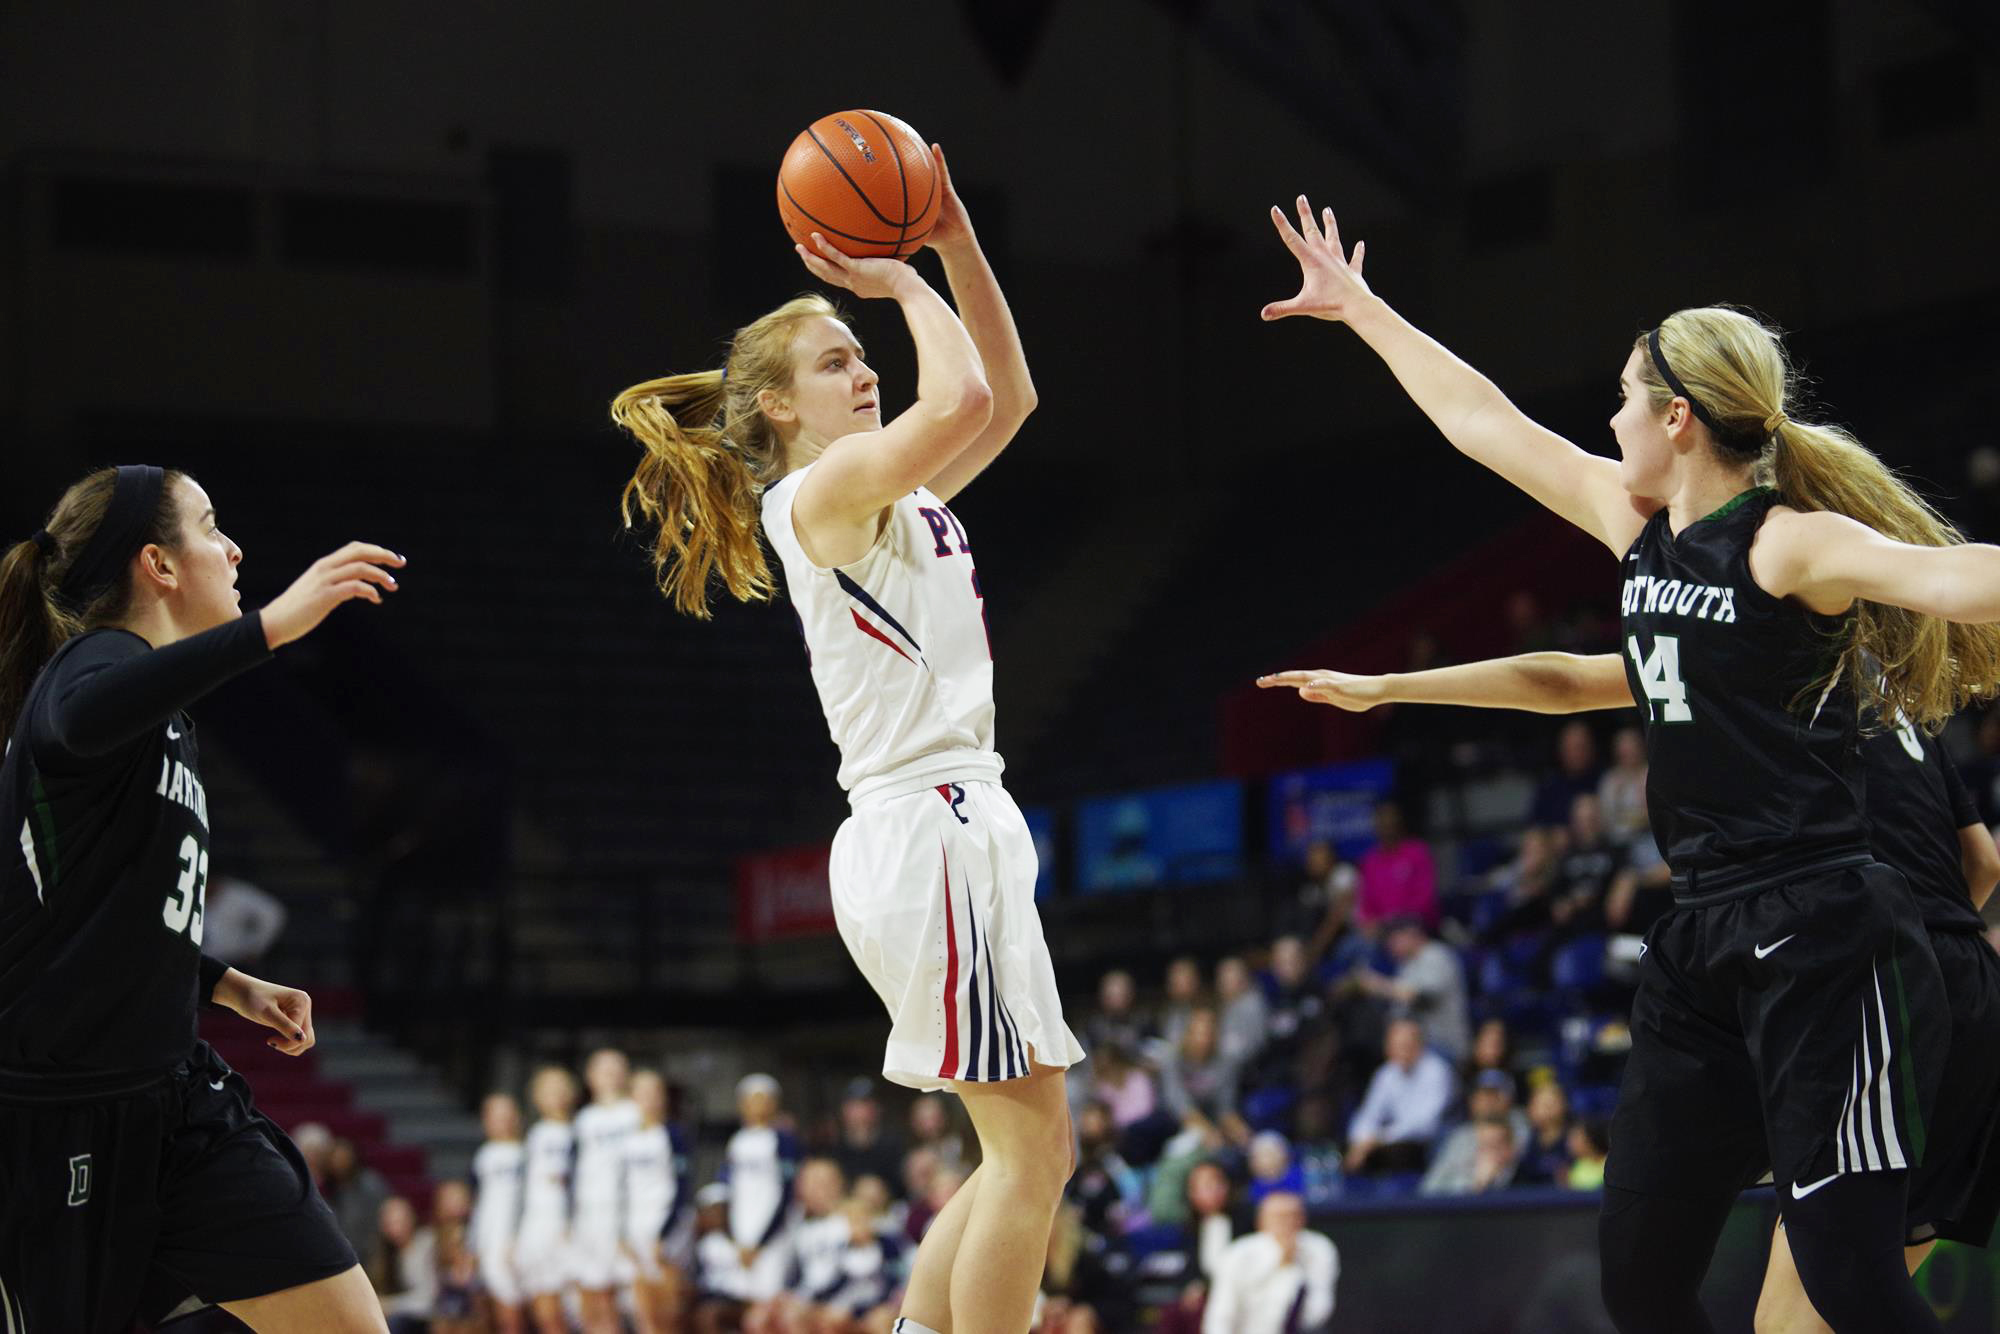 Ashley Russell shoots the ball during a game at the Palestra.